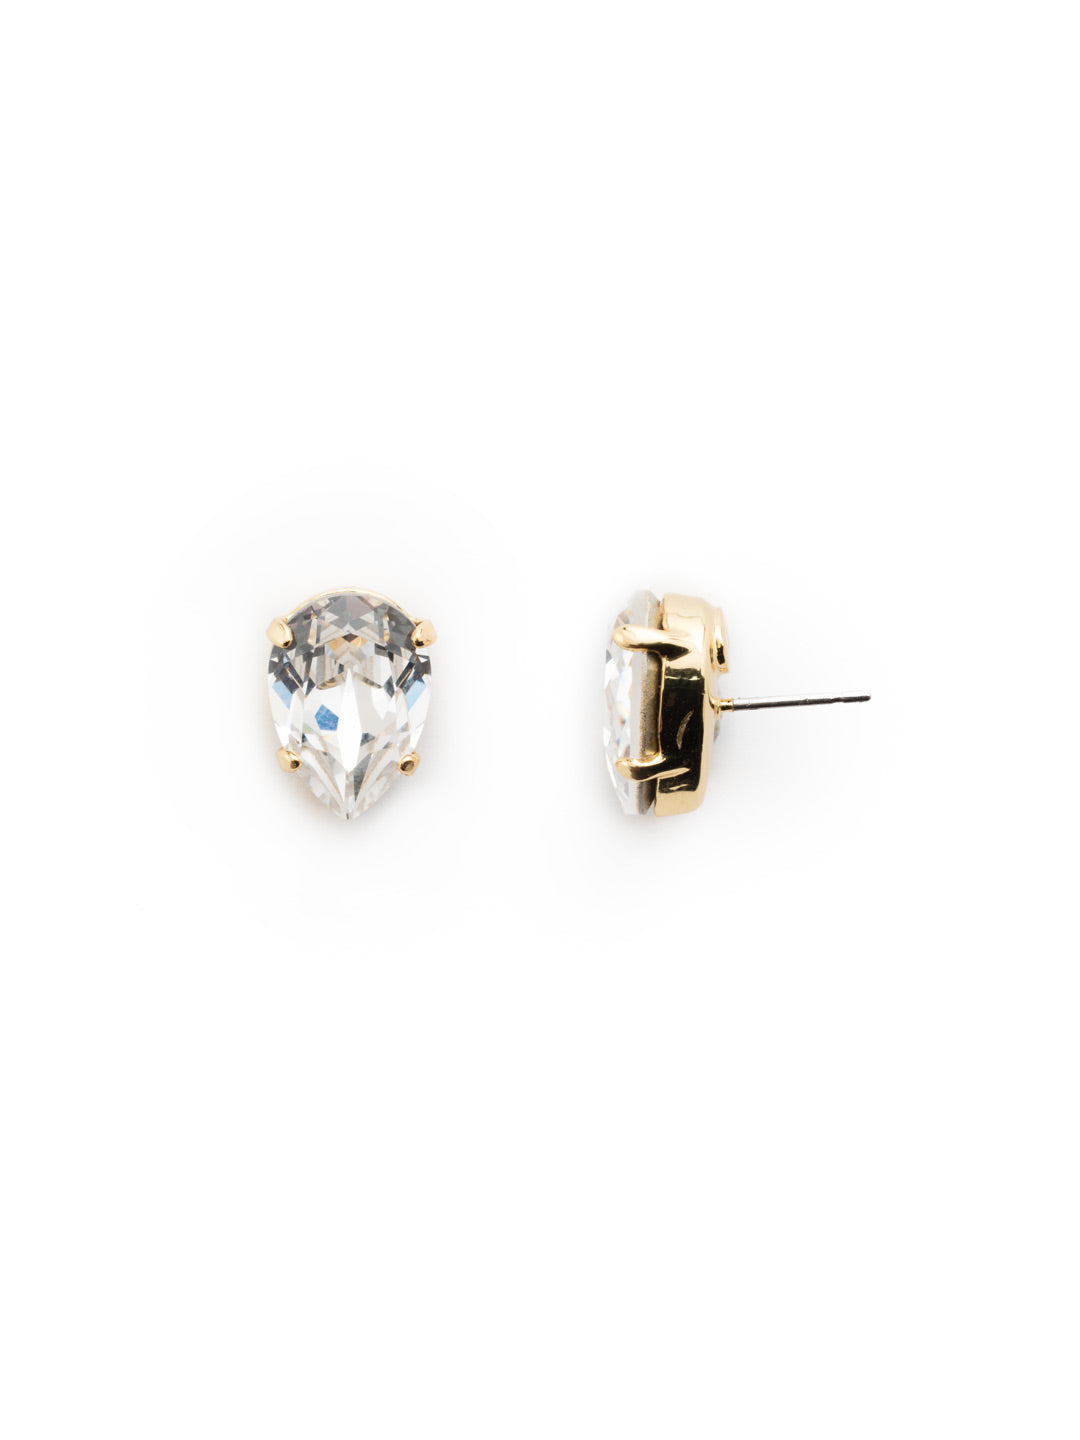 Clear Round Stone Stud Earrings on Gold - 3 pairs | 0.2